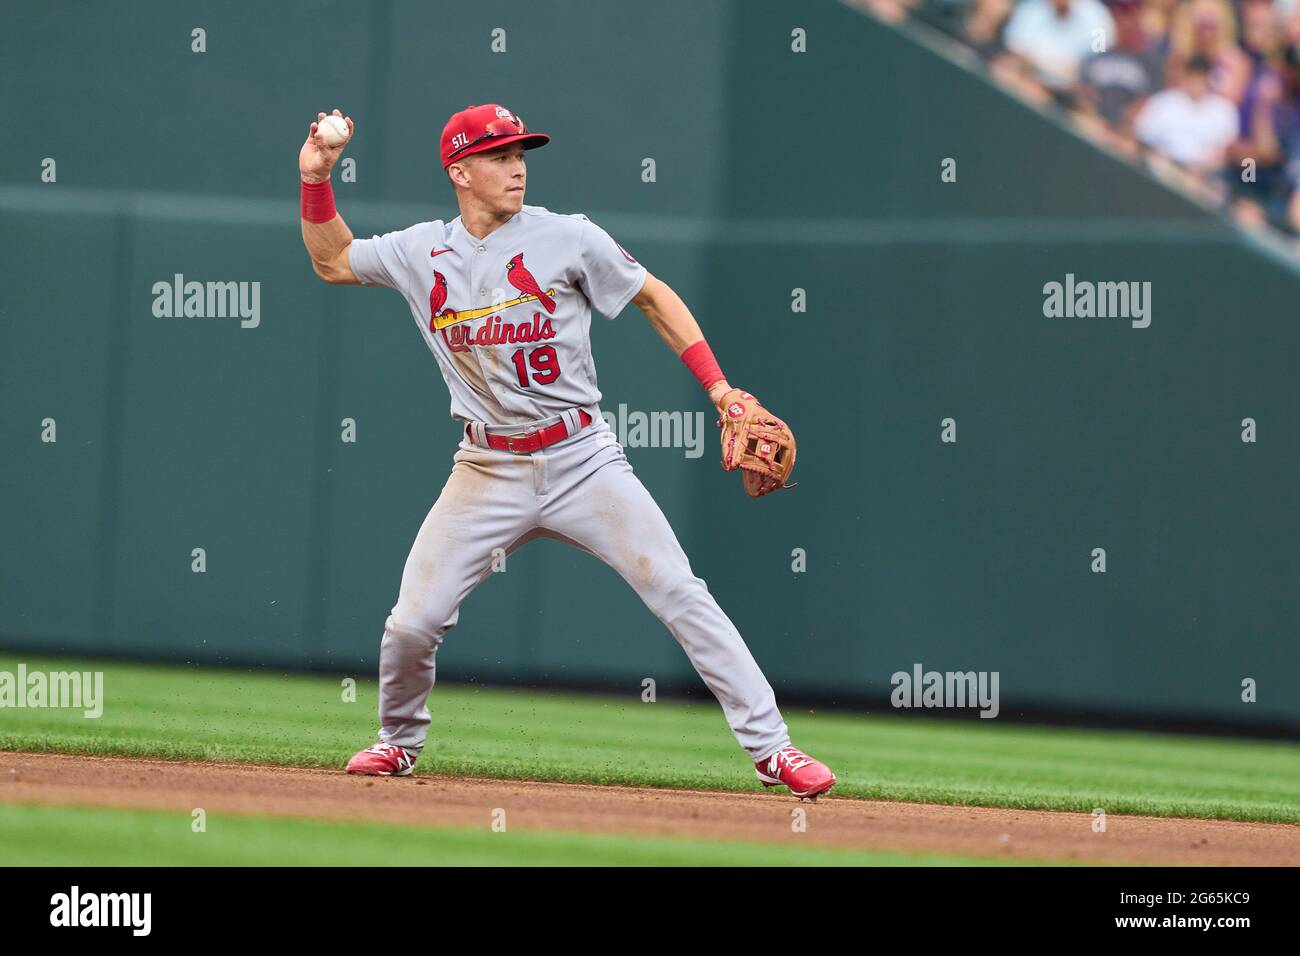 July 2. 2021: Saint Louis second basemen Tommy Edman (19) makes a play during the MLB game between the Saint Louis Cardinals and the Colorado Rockies held at Coors Field in Denver Co. David Seelig/Cal Sport Medi Stock Photo